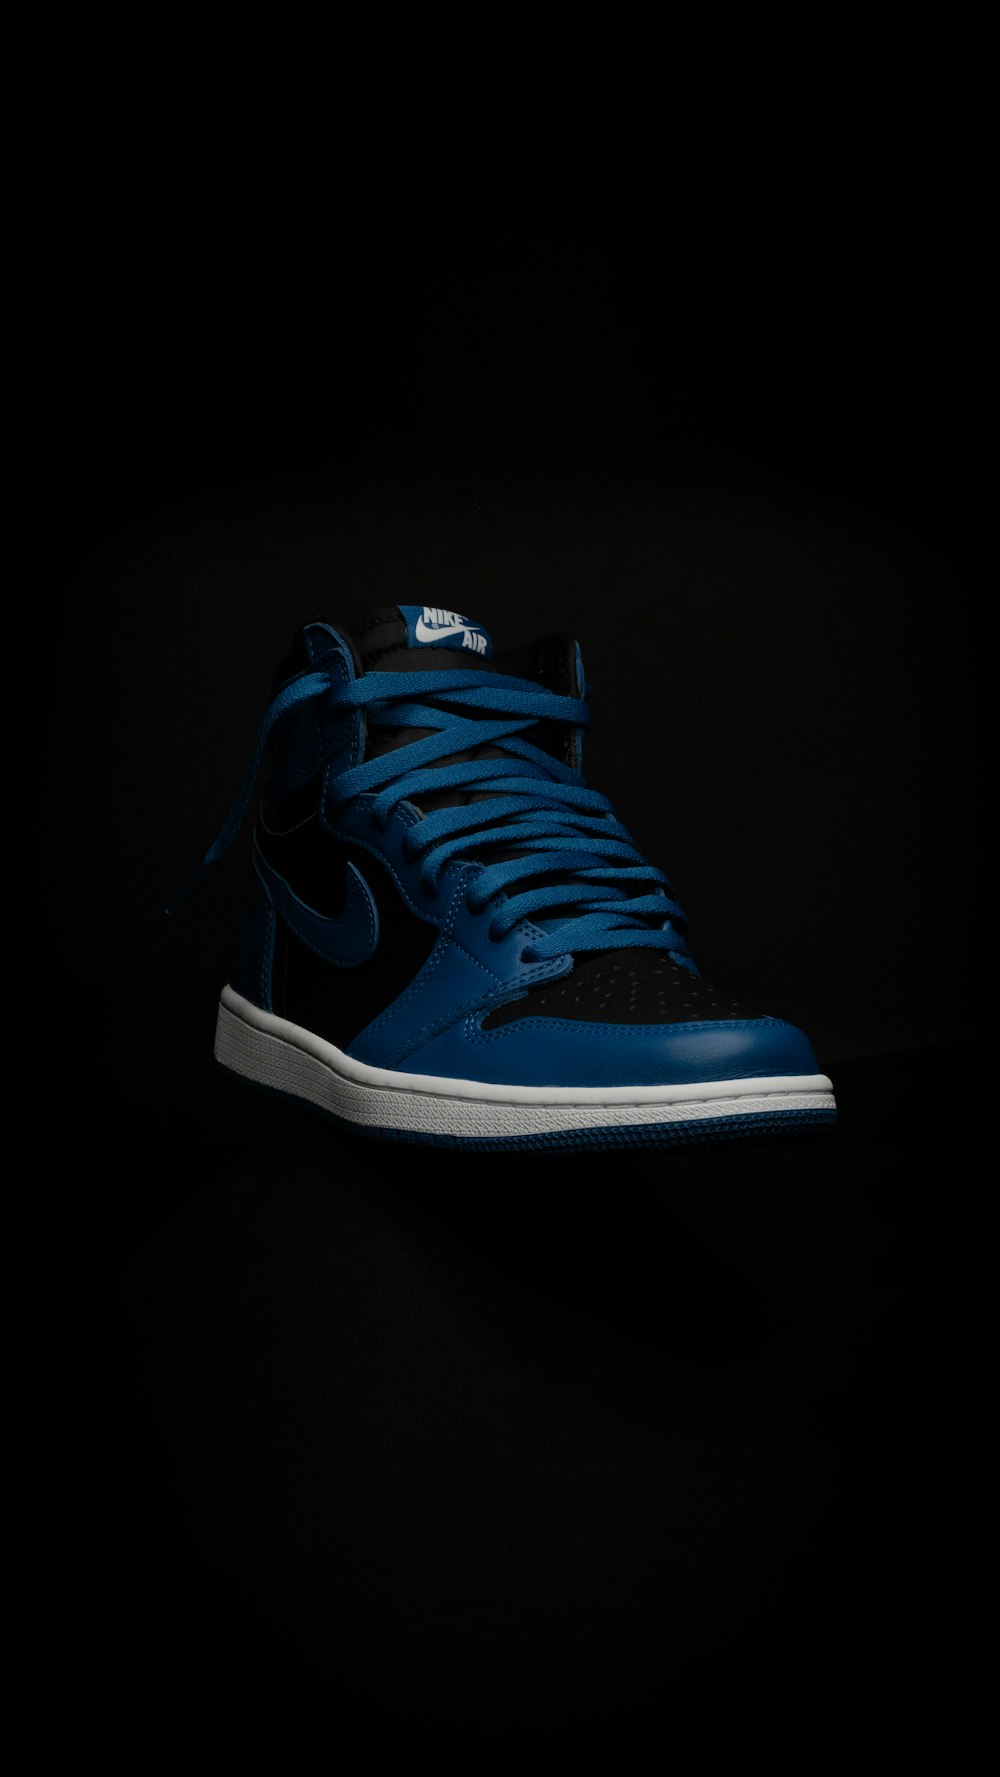 a pair of blue sneakers on a black background